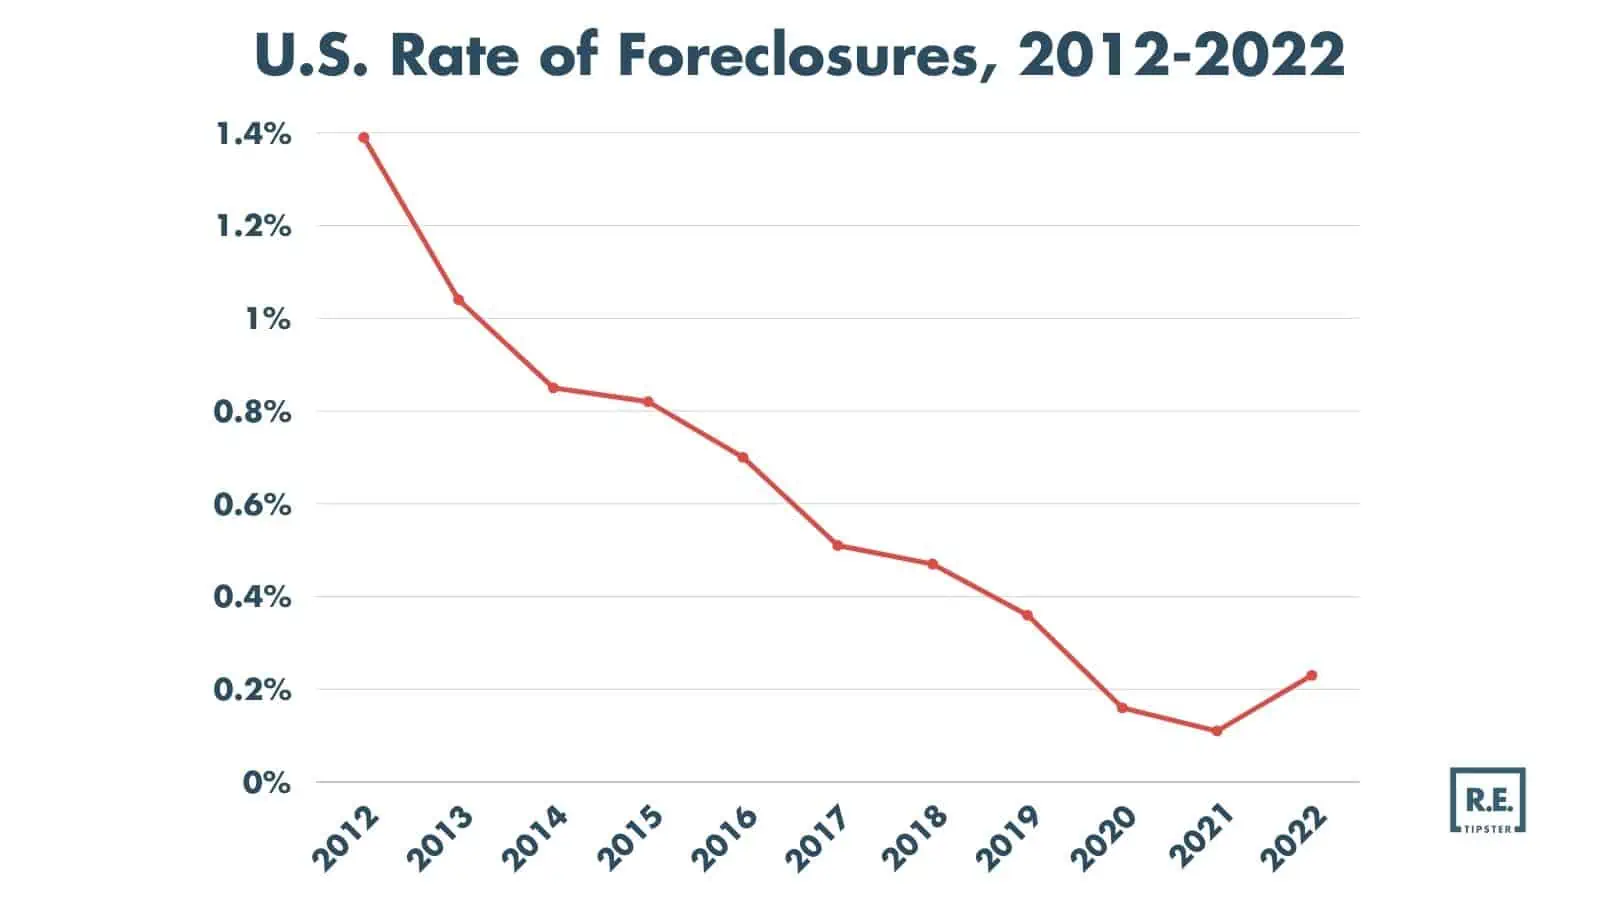 U.S. Rate of Foreclosures, 2012-2022